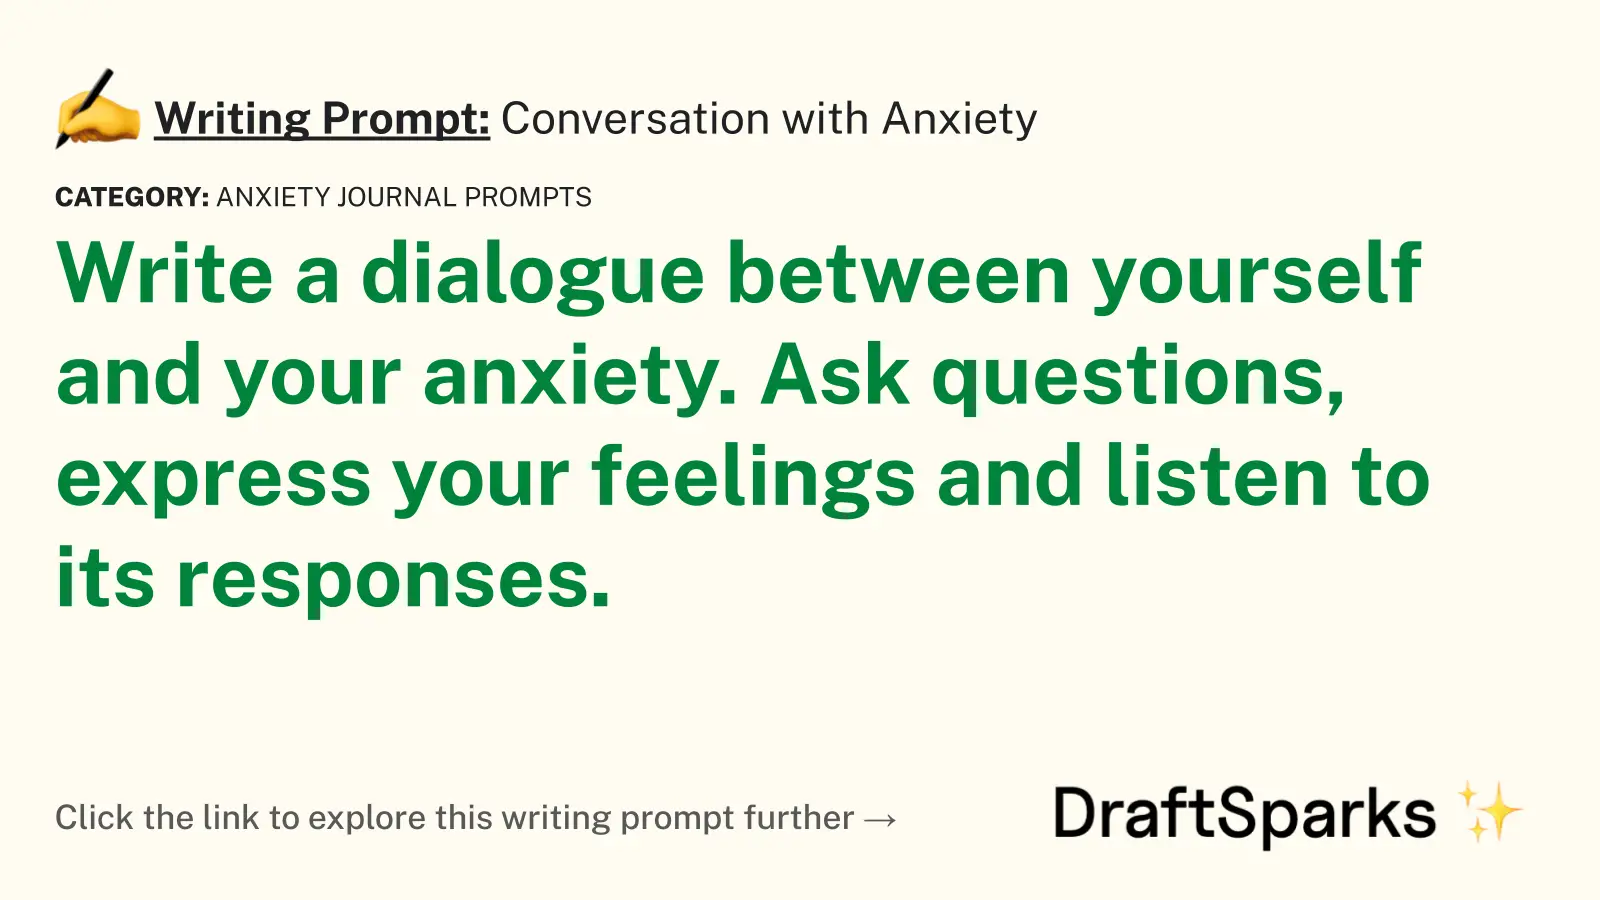 Conversation with Anxiety